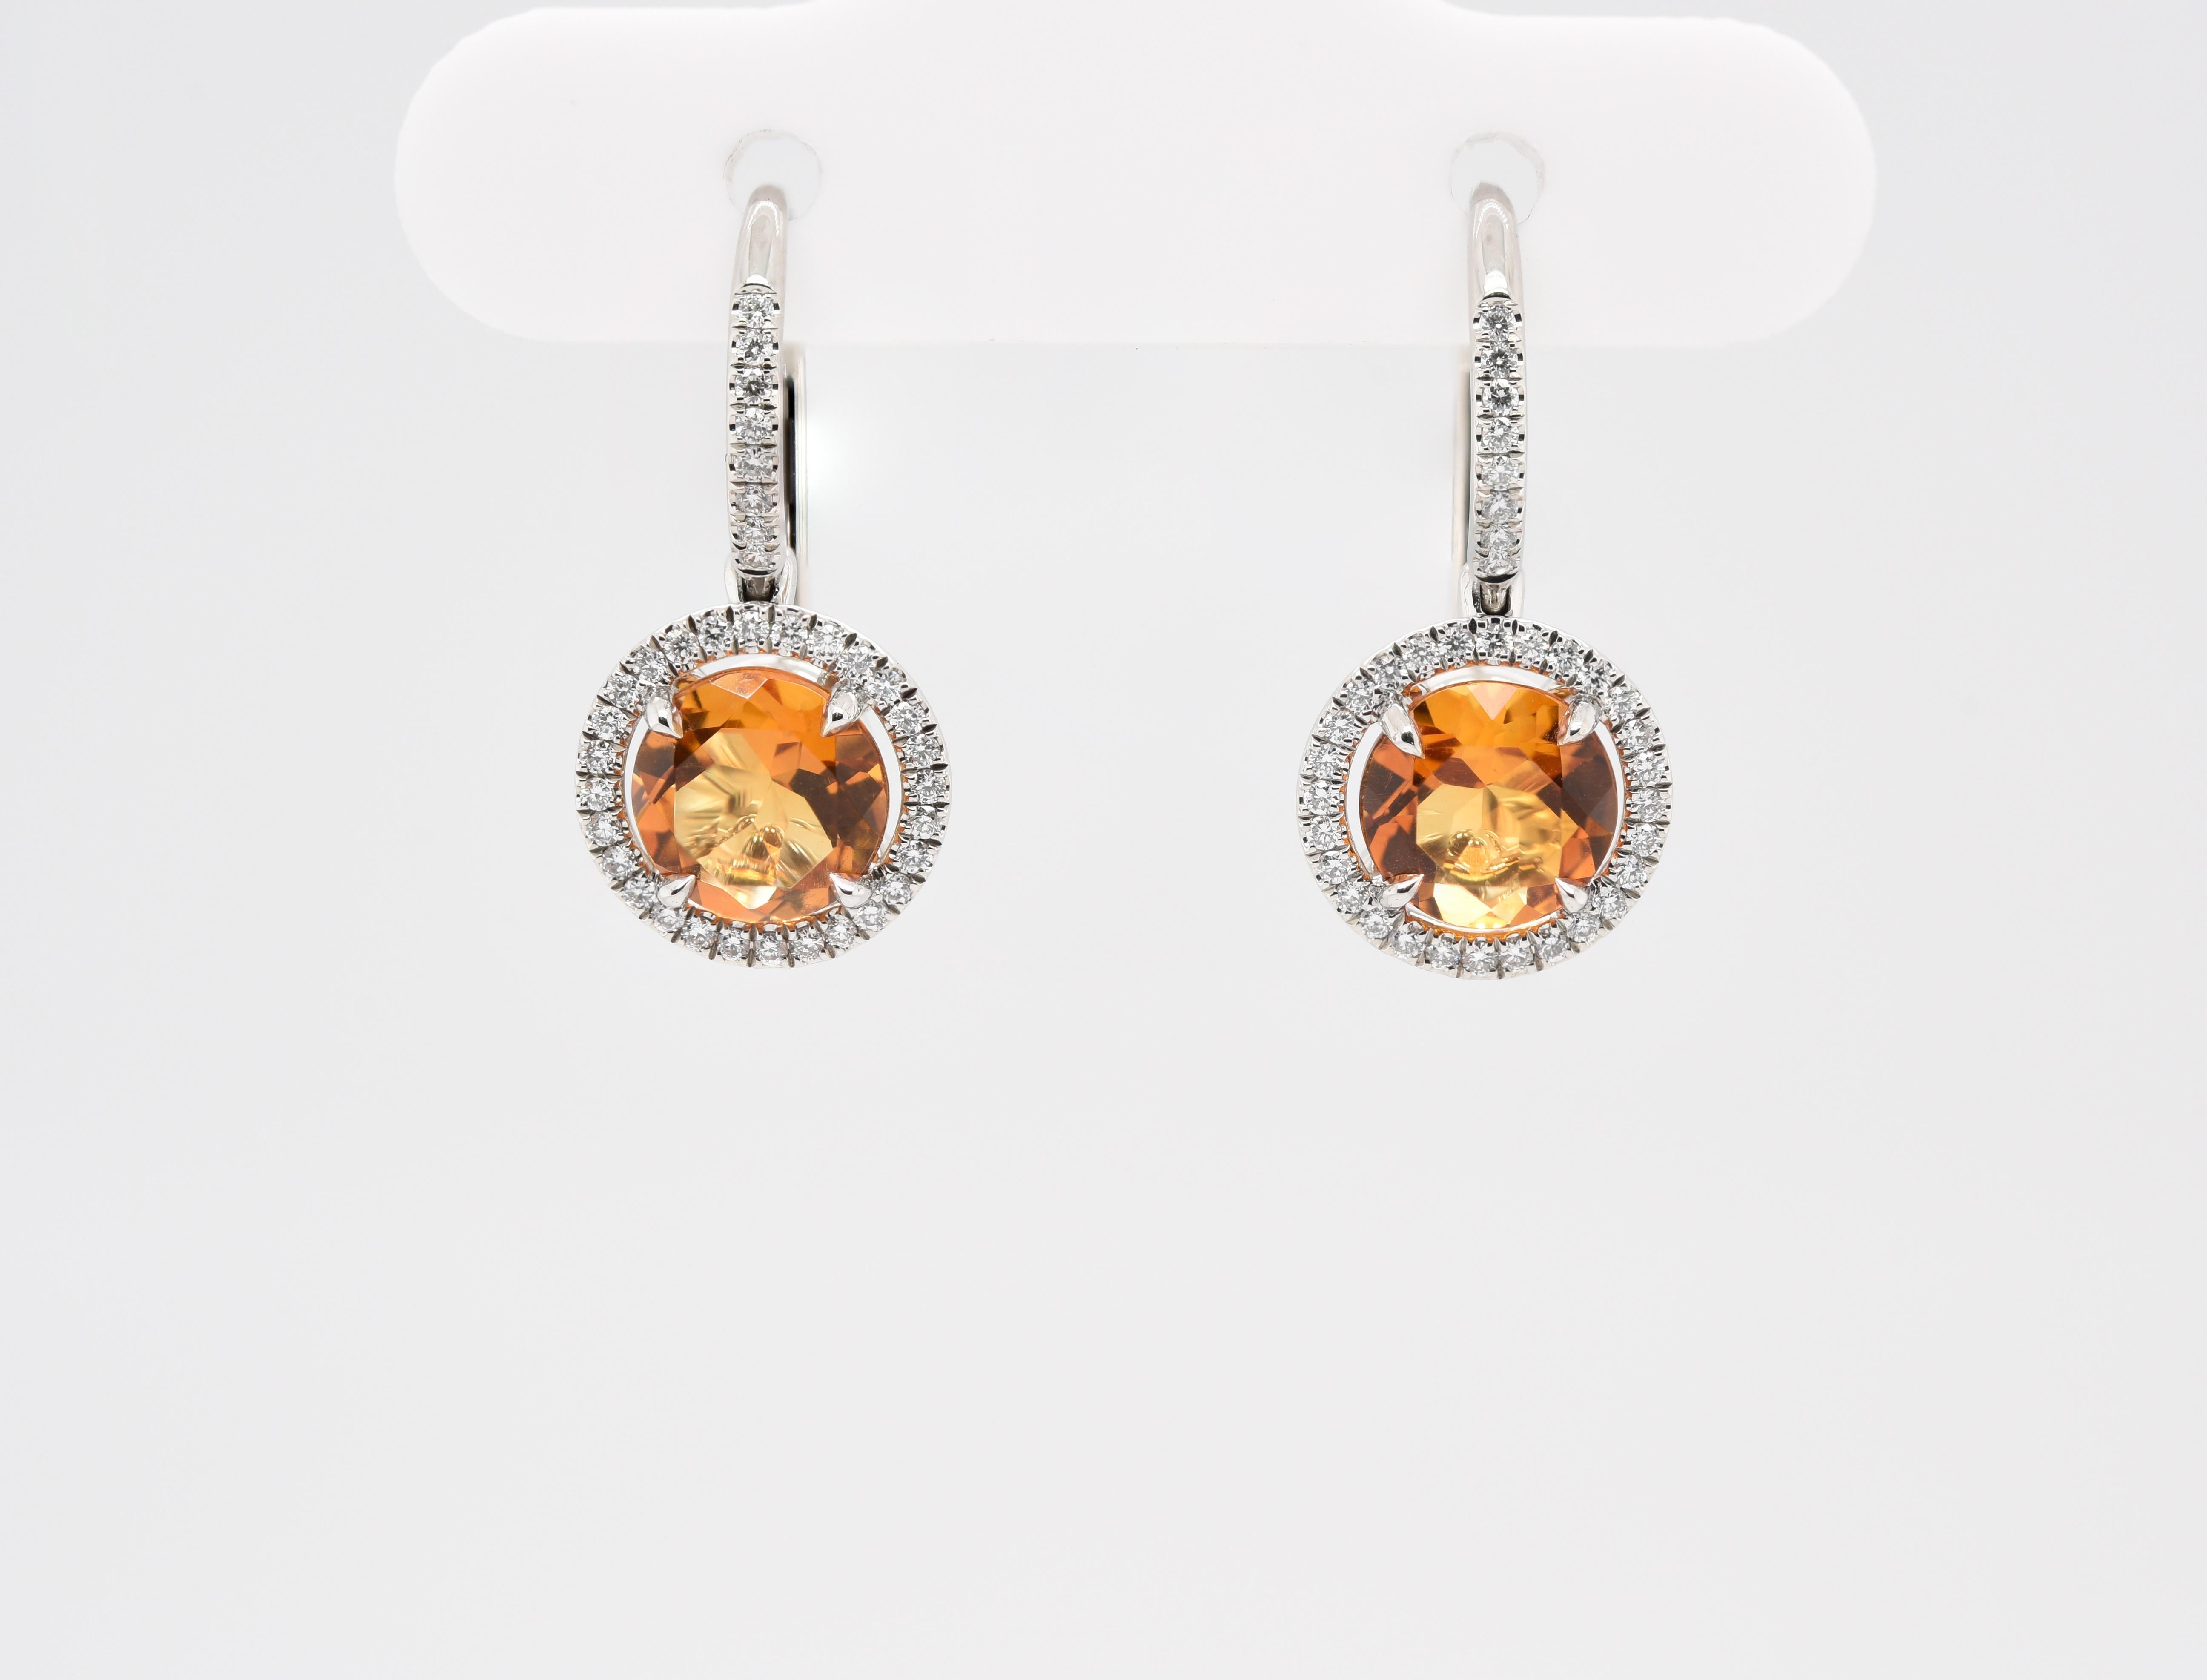 These Radiant Halo Yellow Citrine and Diamond Earrings have 1.5 carats of Yellow Citrine and 72 Diamonds all set in Platinum. 

At JAG New York we have been designing, manufacturing and guaranteeing our craftsmanship in New York since 1995!  Express